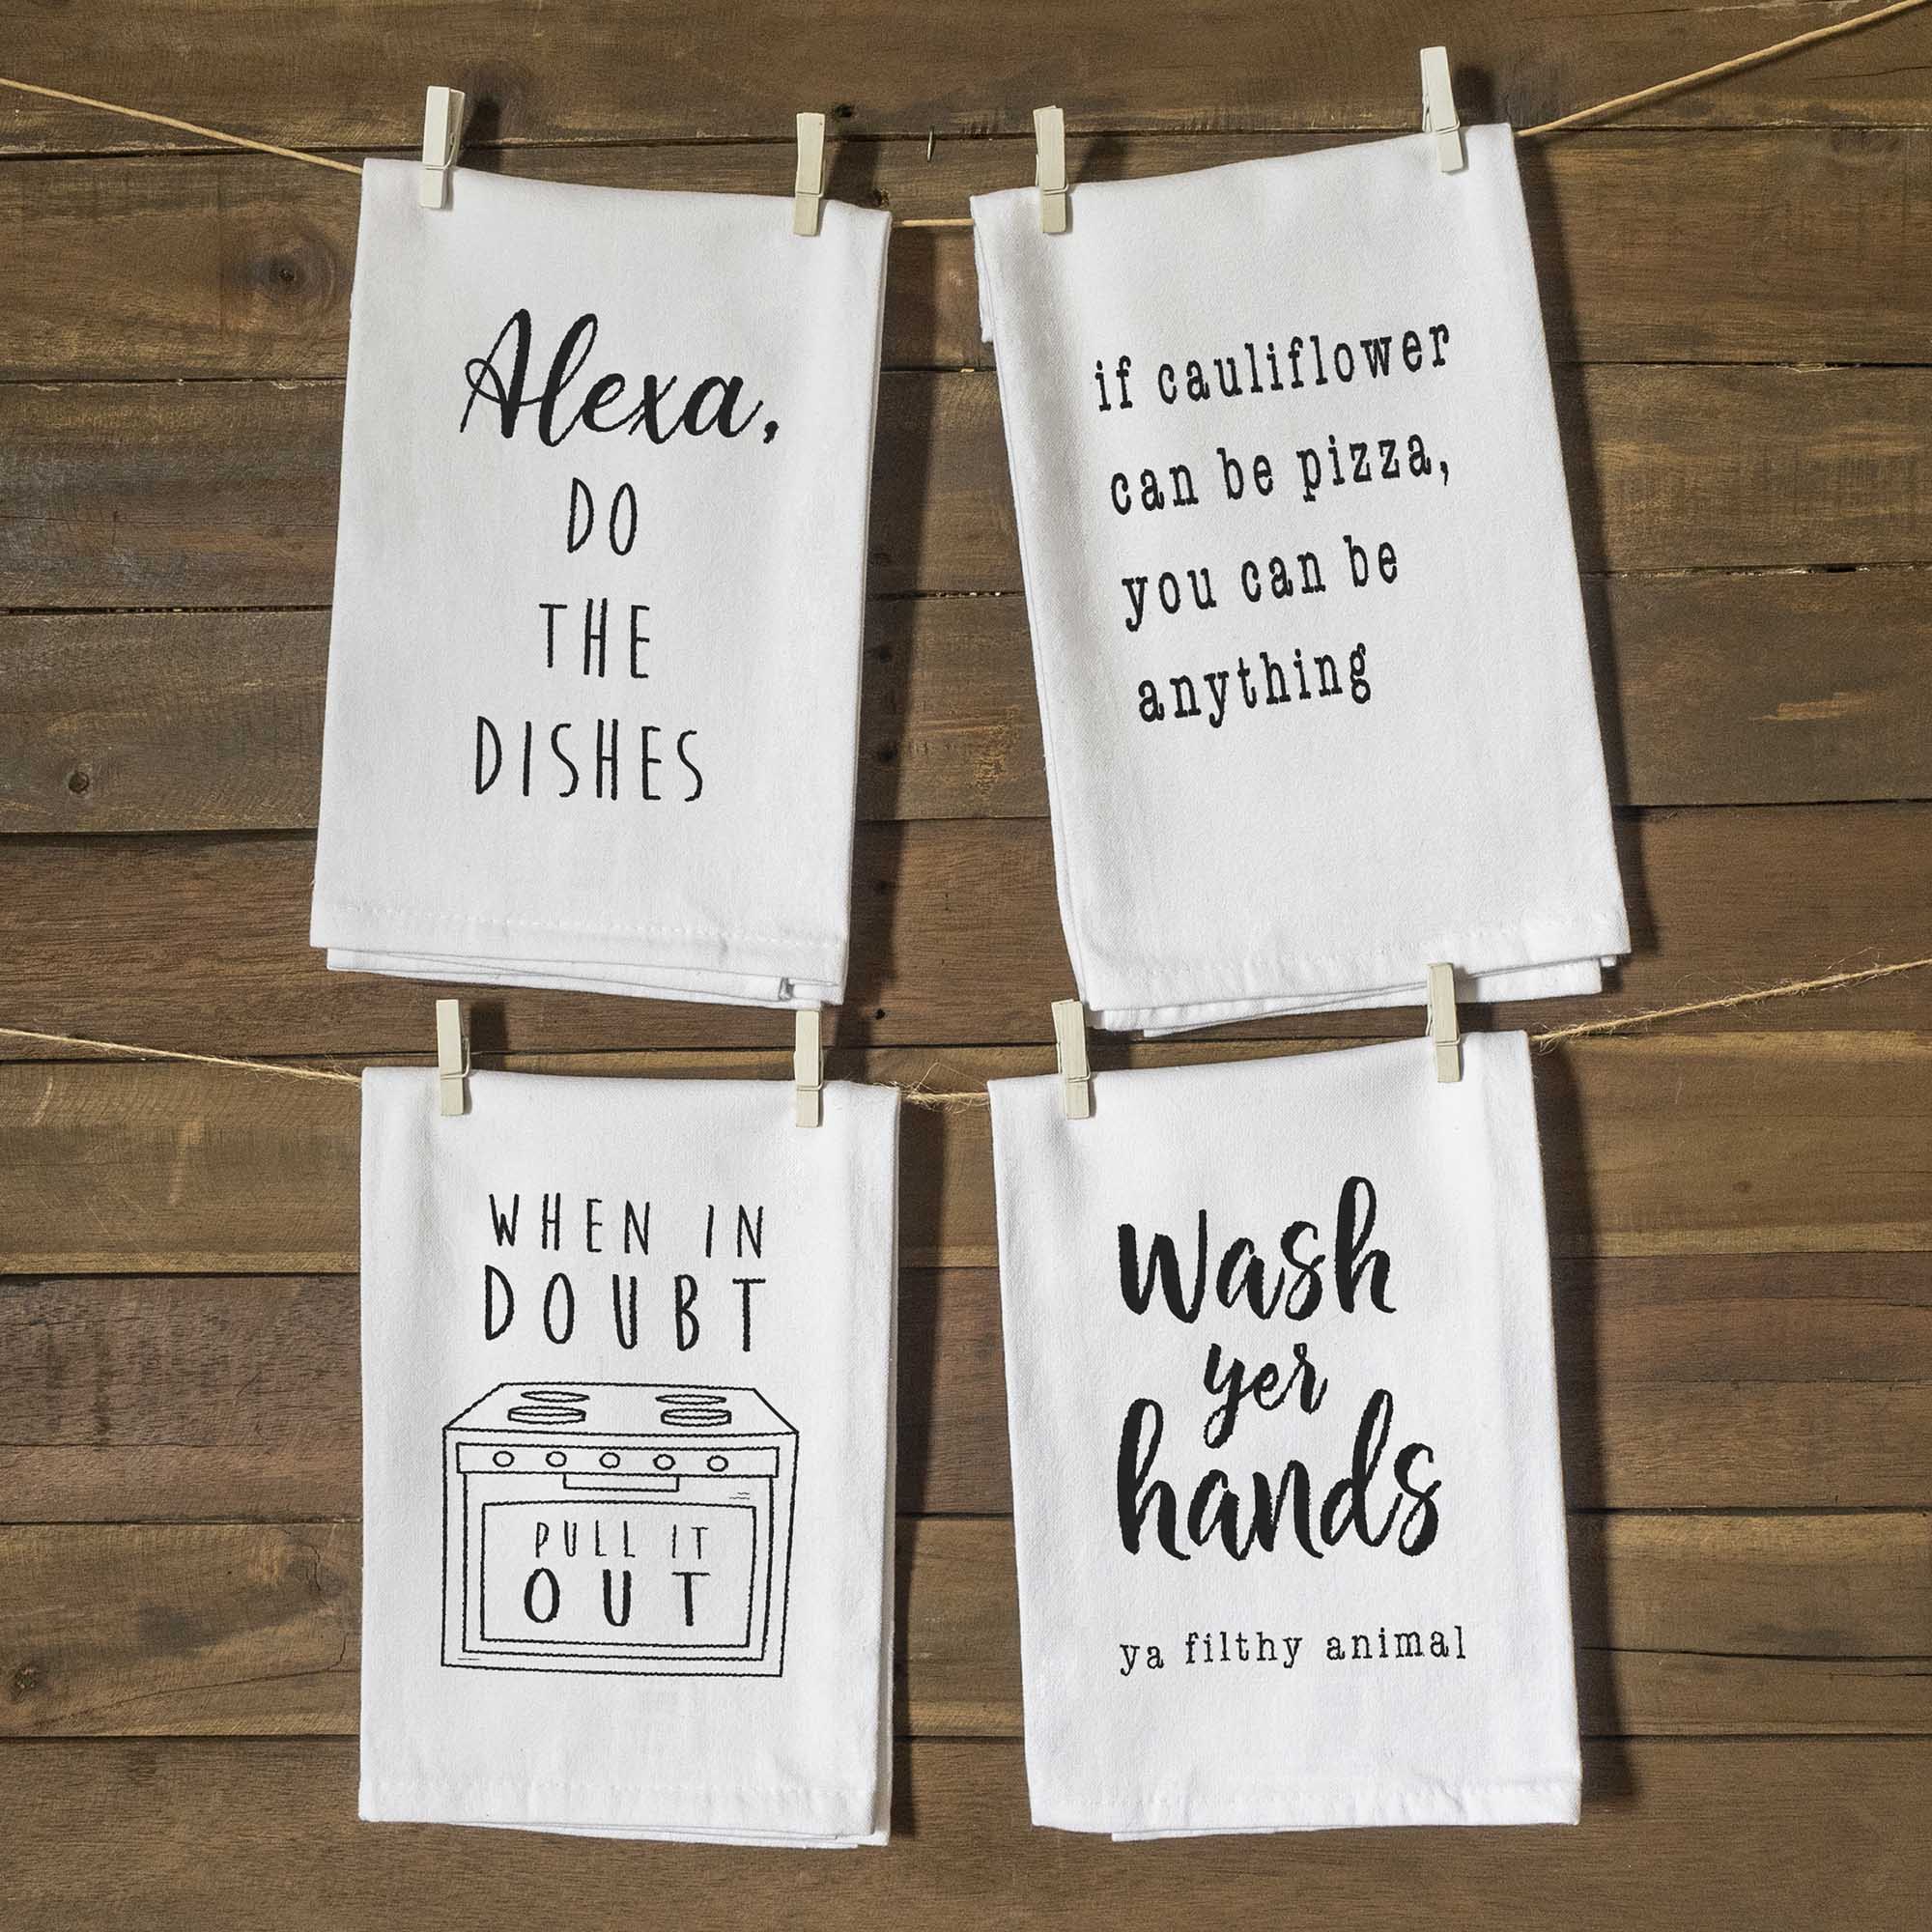 MAINEVENT Funny Kitchen Towel 4 Pack 18x24 Inch, Set of 4 Cute Kitchen  Towel, Funny Dish Towel Saying, Funny Housewarming Gift Funny Hand Towel  Alexa